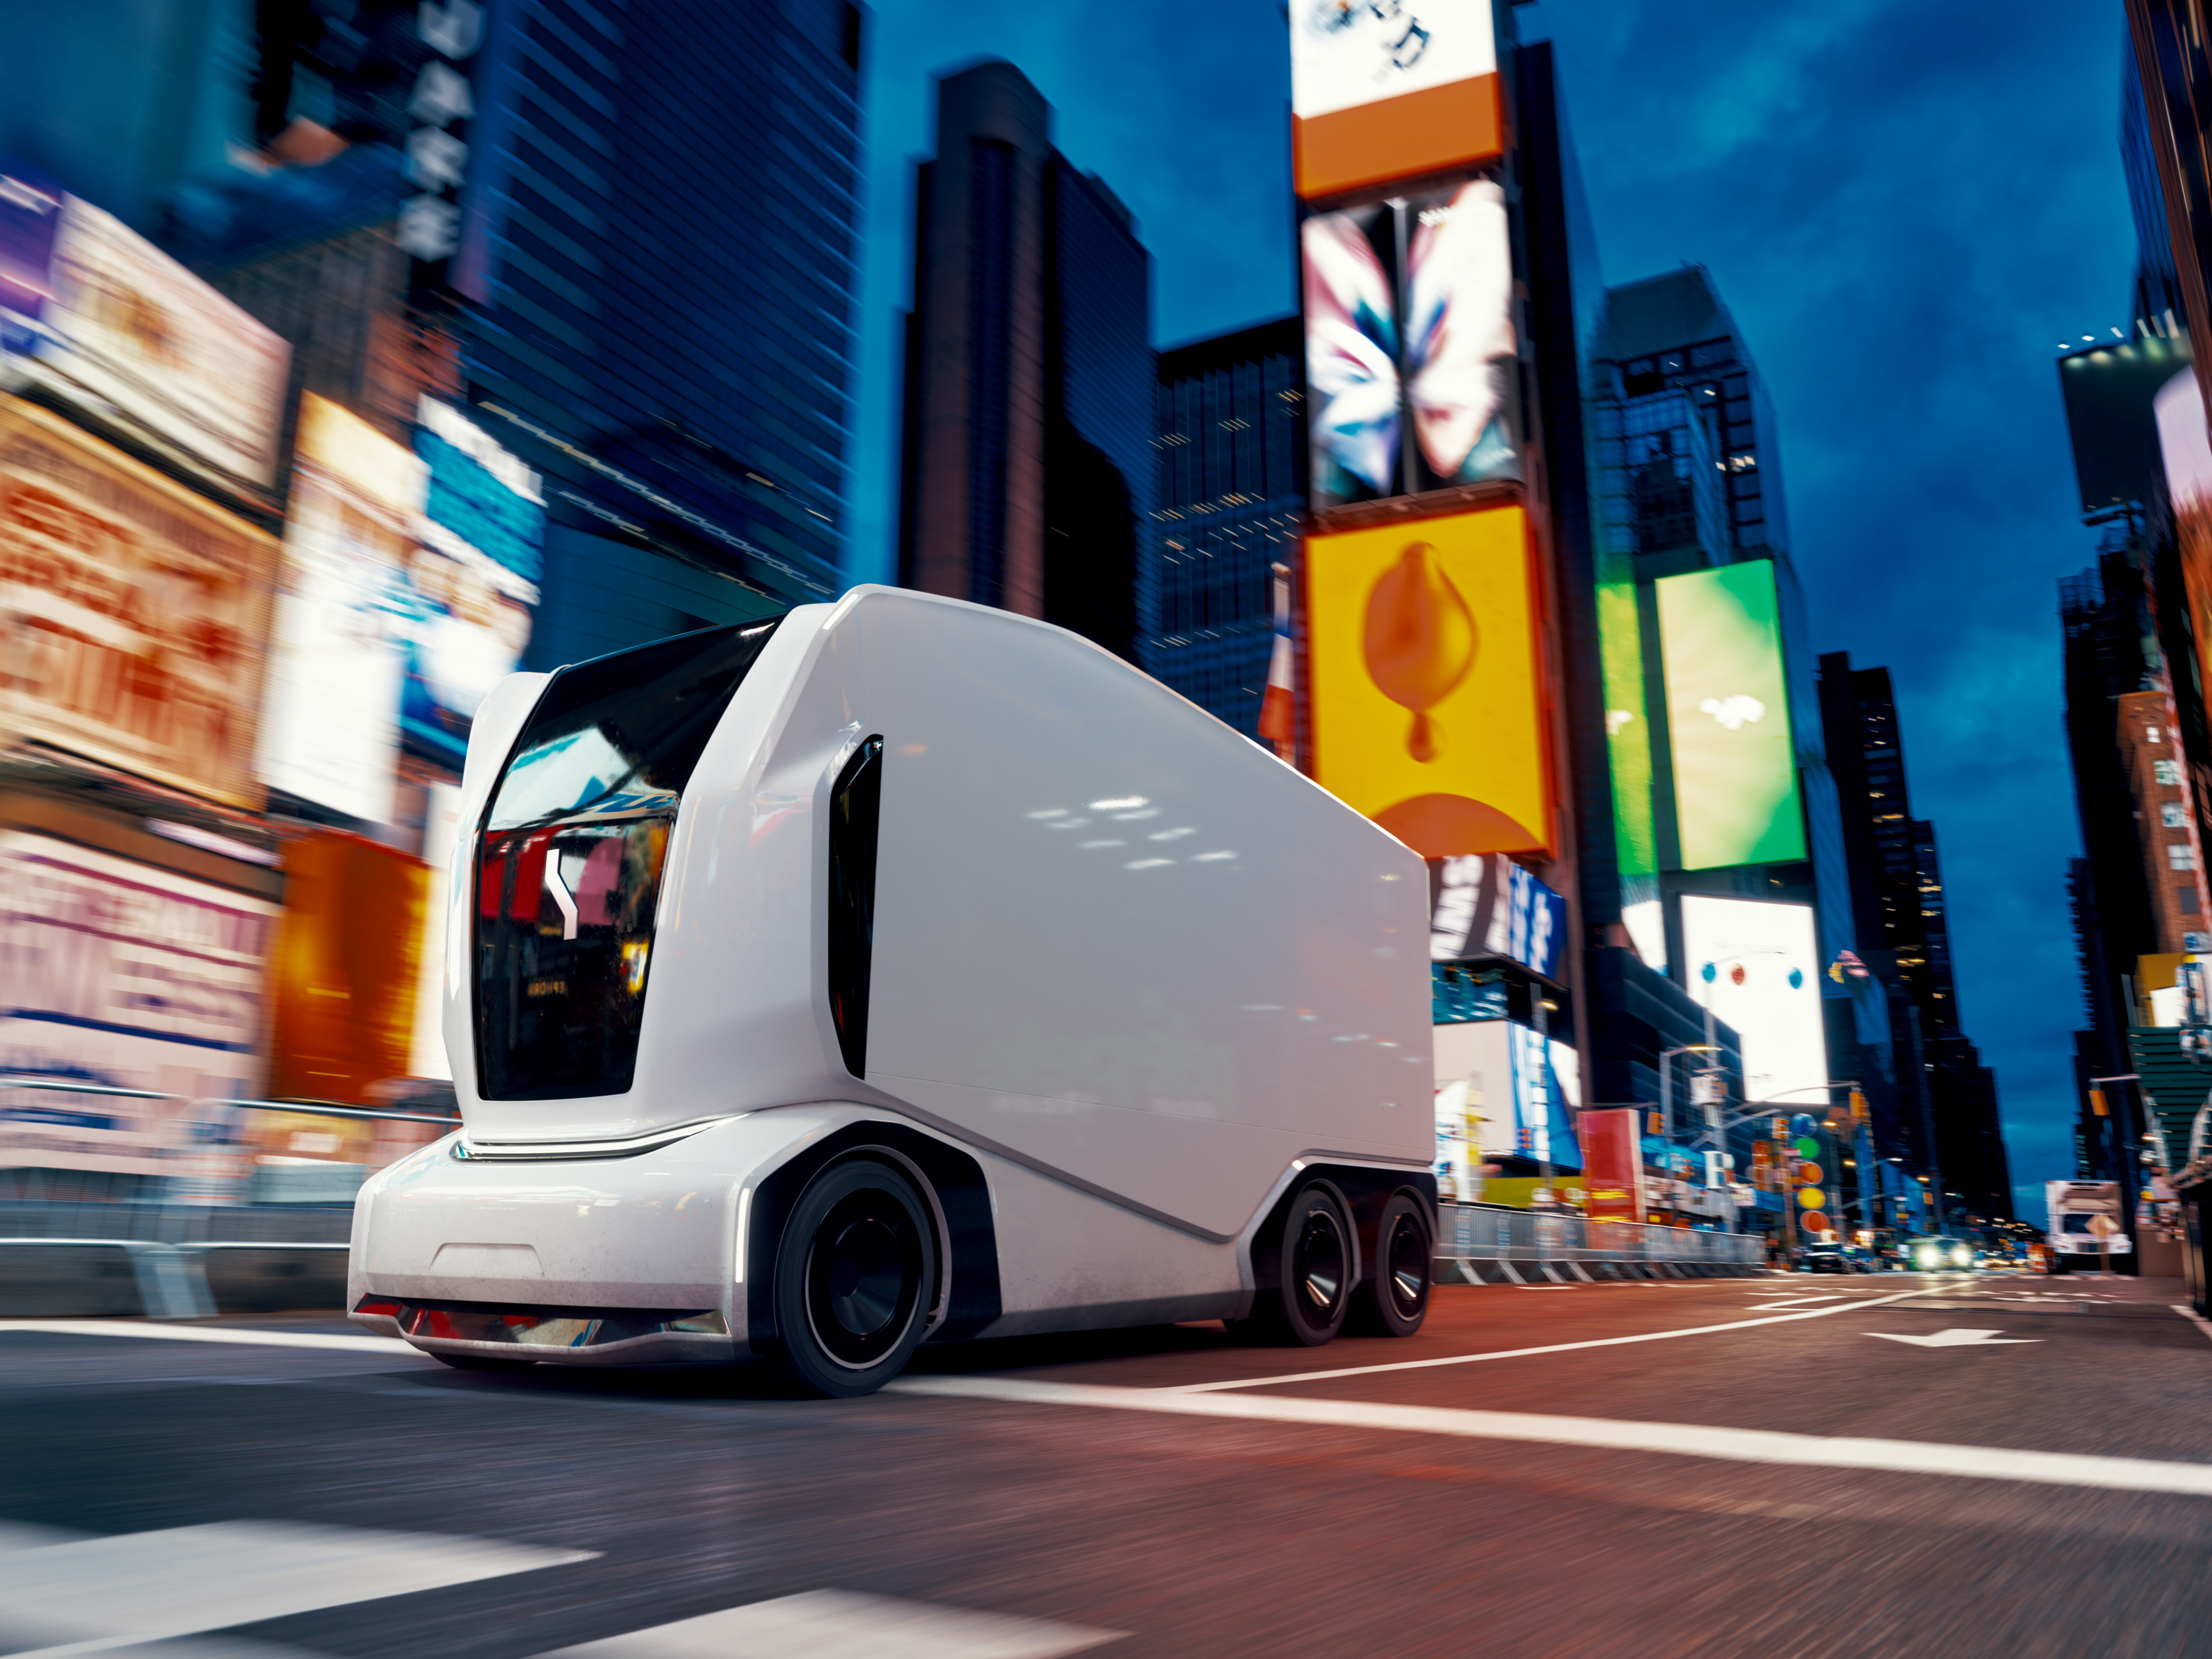 An Einride Pod, an electric self-driving truck developed by Einride, which has no cabin for a driver, is shown in this undated handout photo obtained by Reuters on November 3, 2021. Einride/Handout via REUTERS